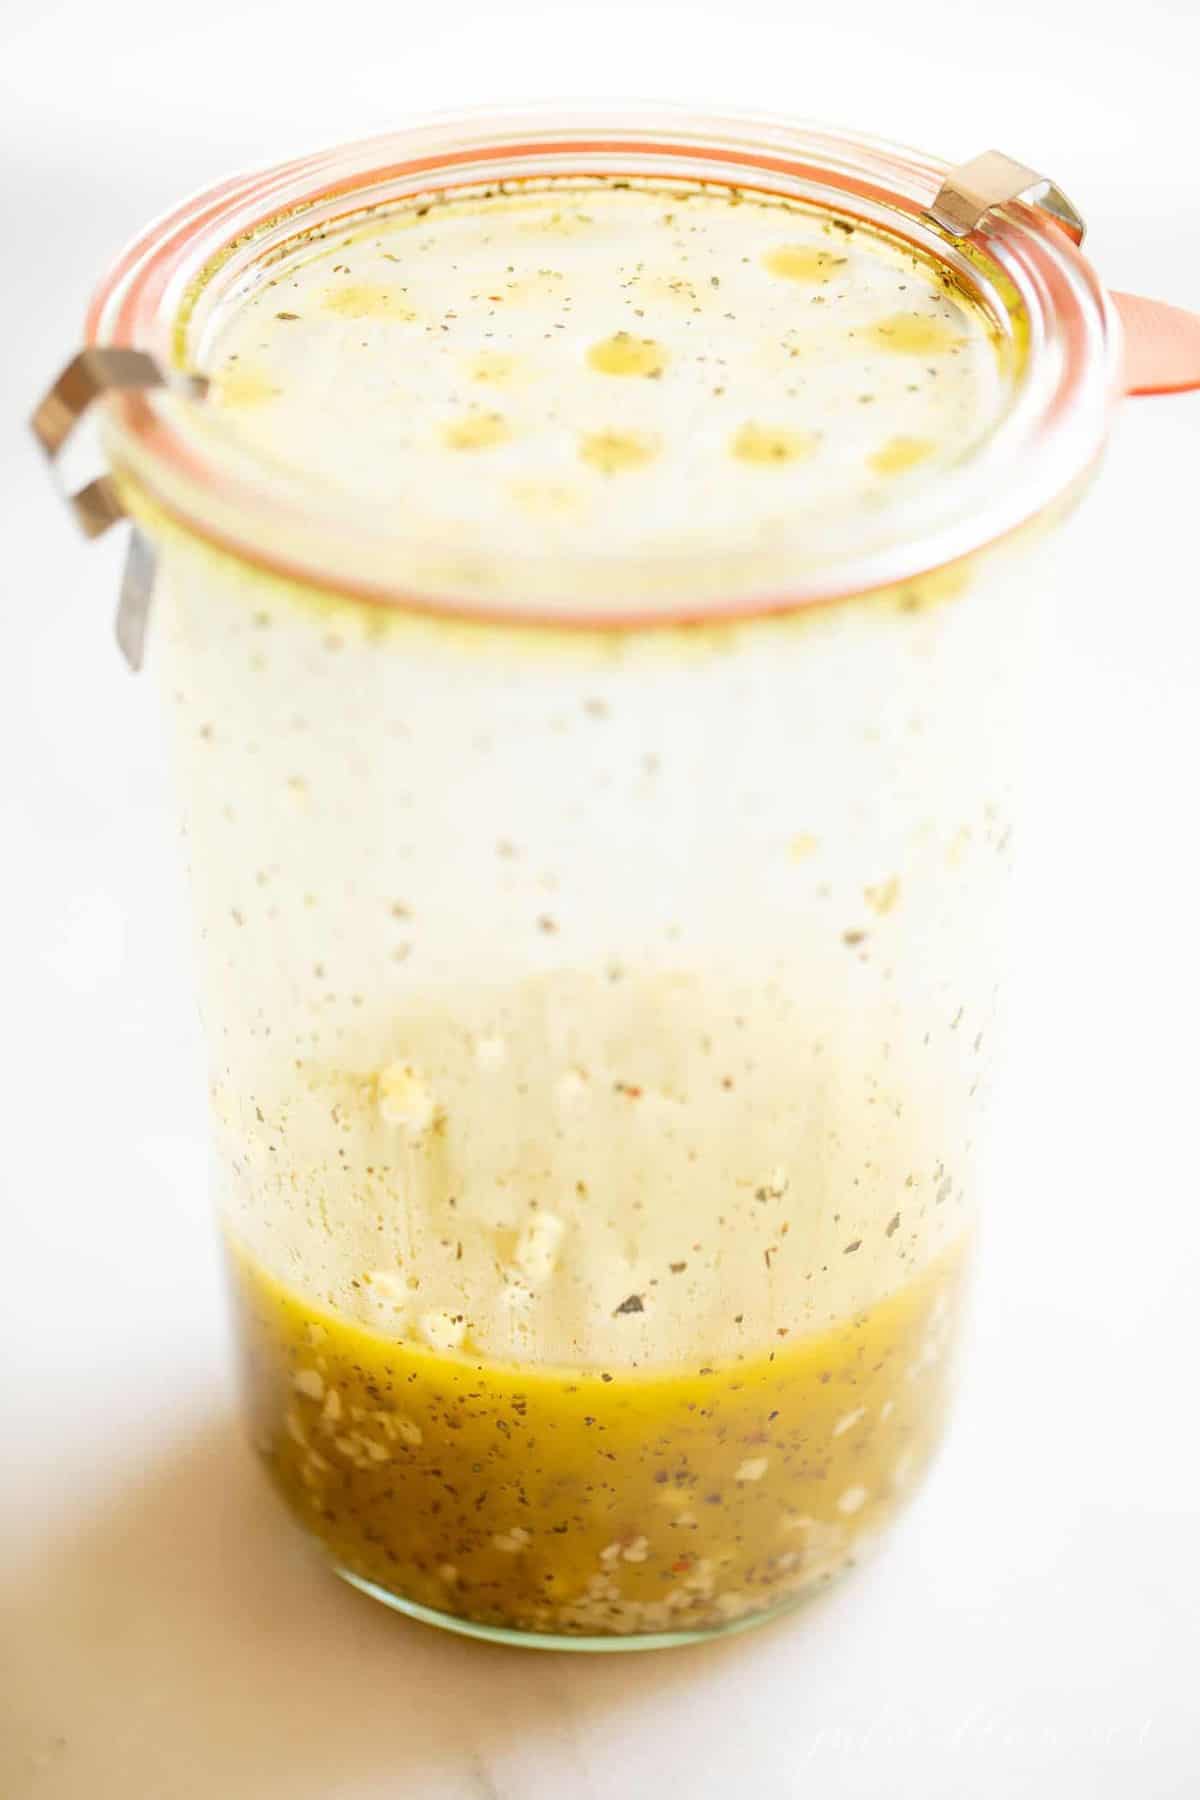 A clear glass jar with a lid full of cold pasta salad recipe dressing.